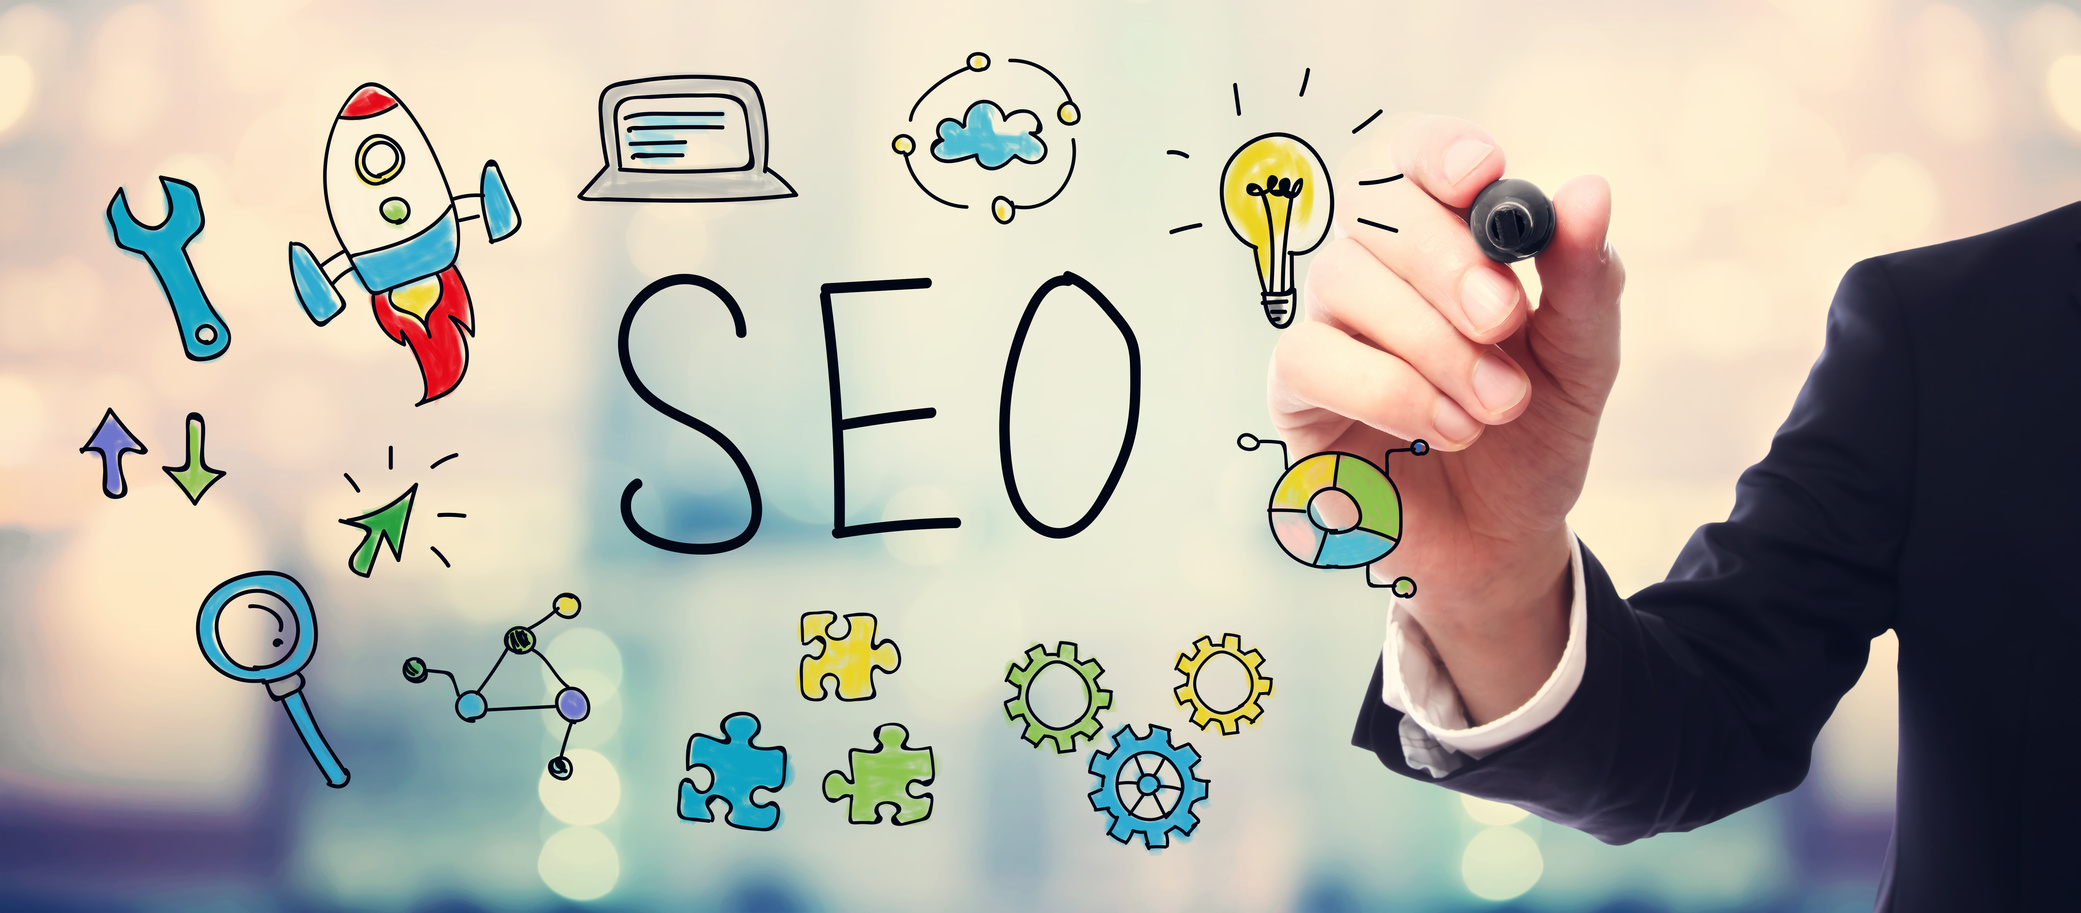 What Have We Learned About SEO This Past Year?